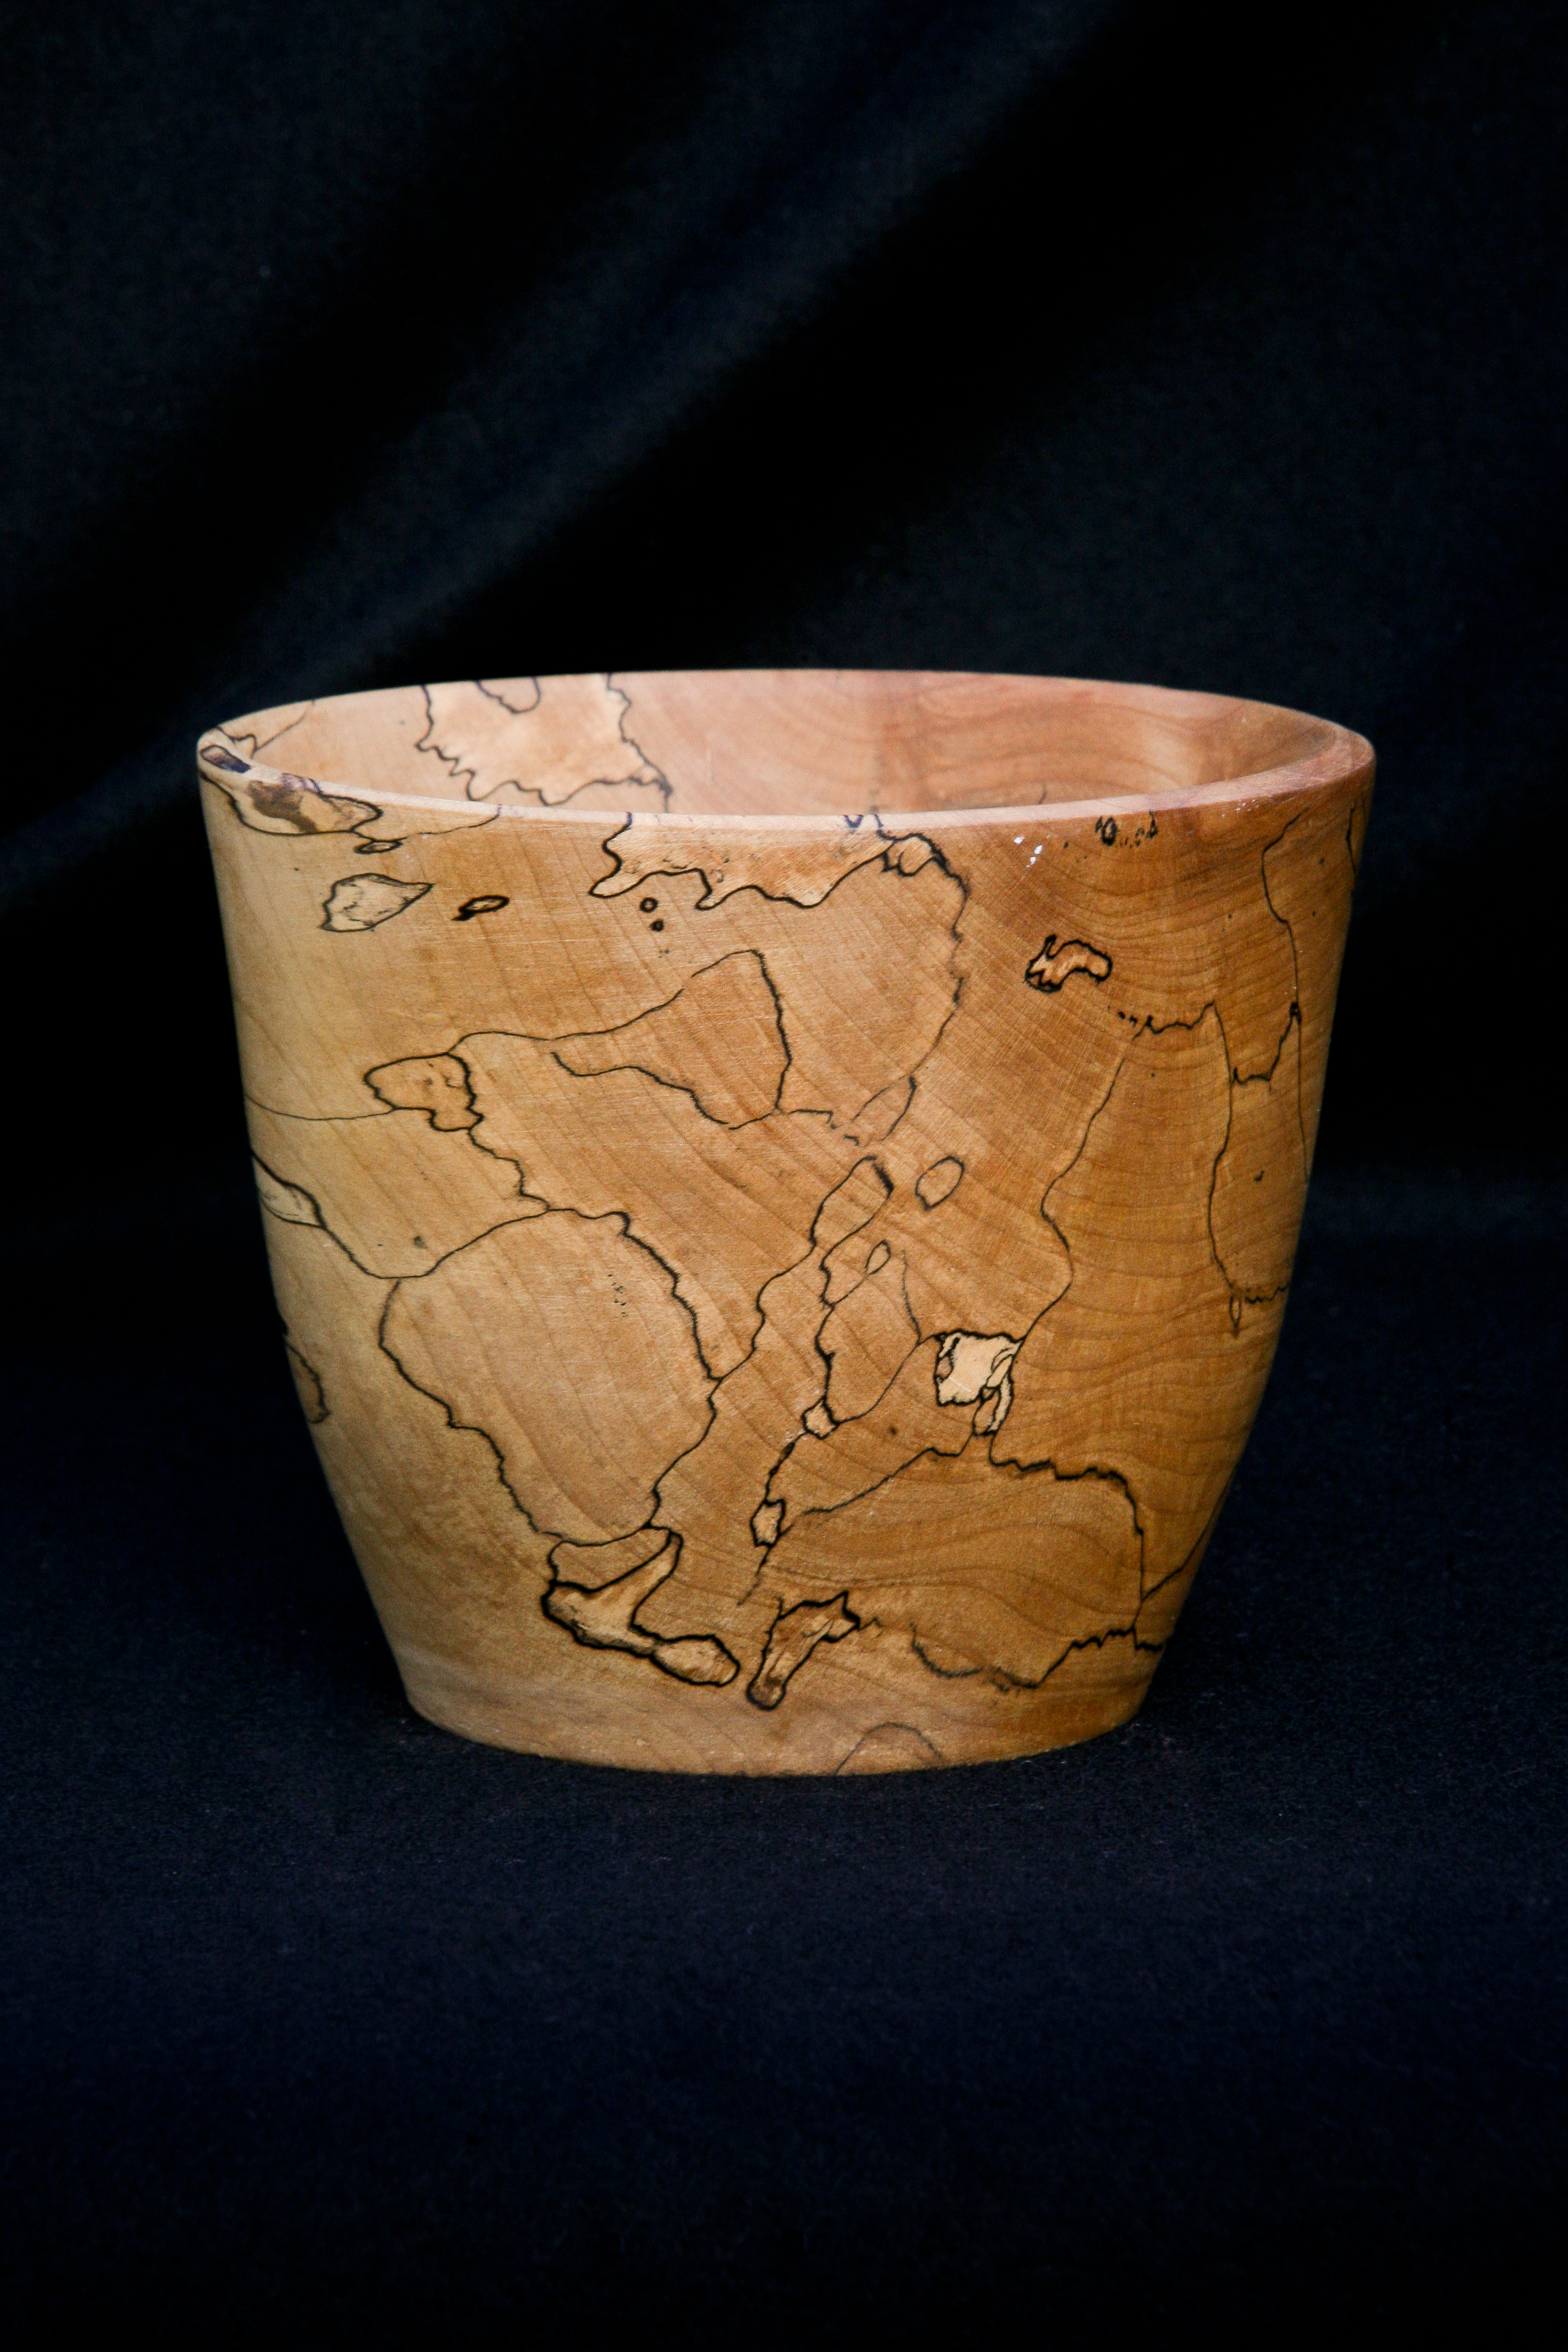 Pot made out of wood